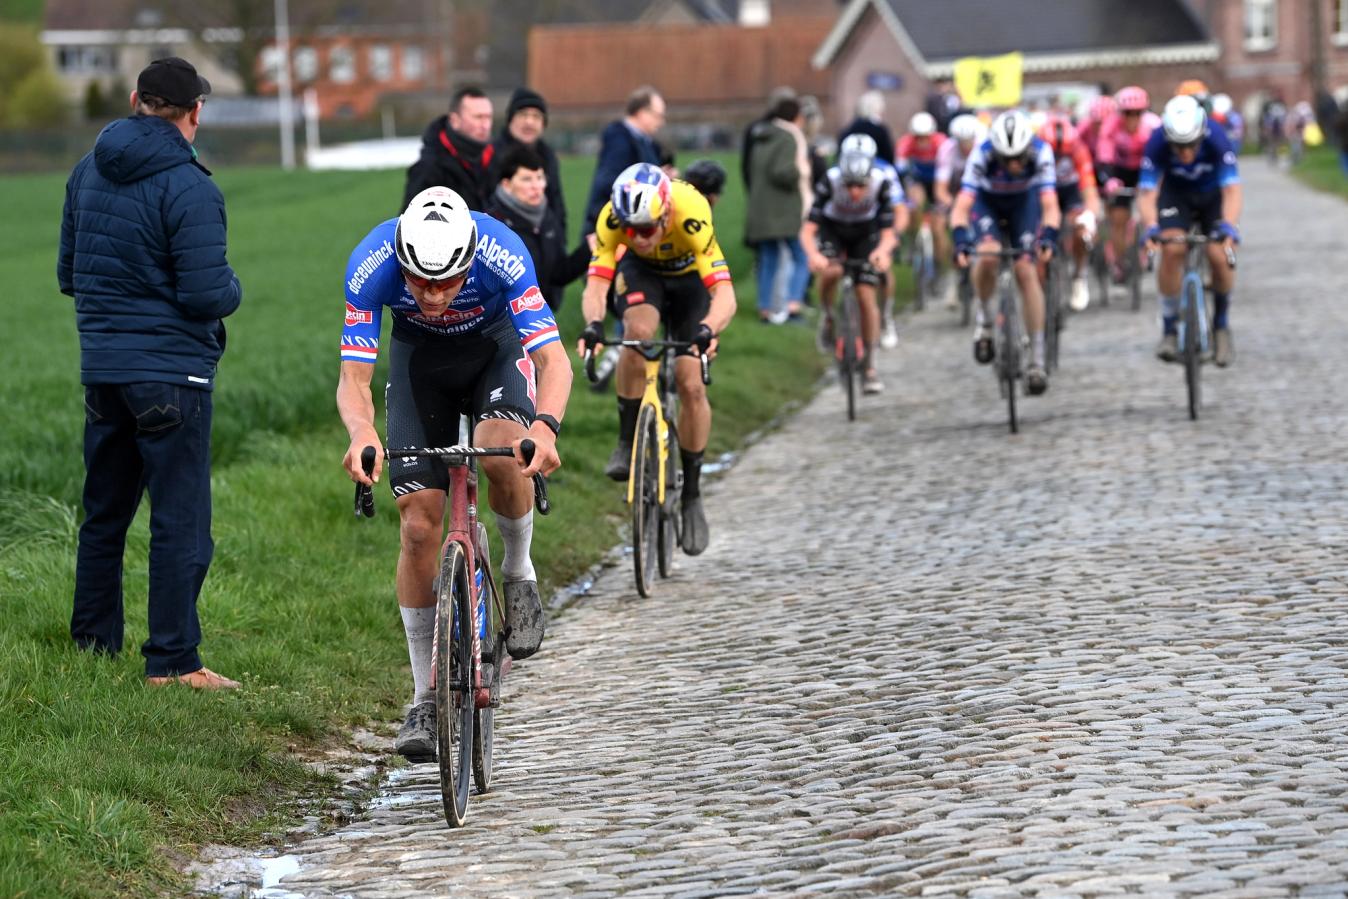 Mathieu van der Poel is undisputedly the best one-day racer on the planet, with Tadej Pogačar a close second